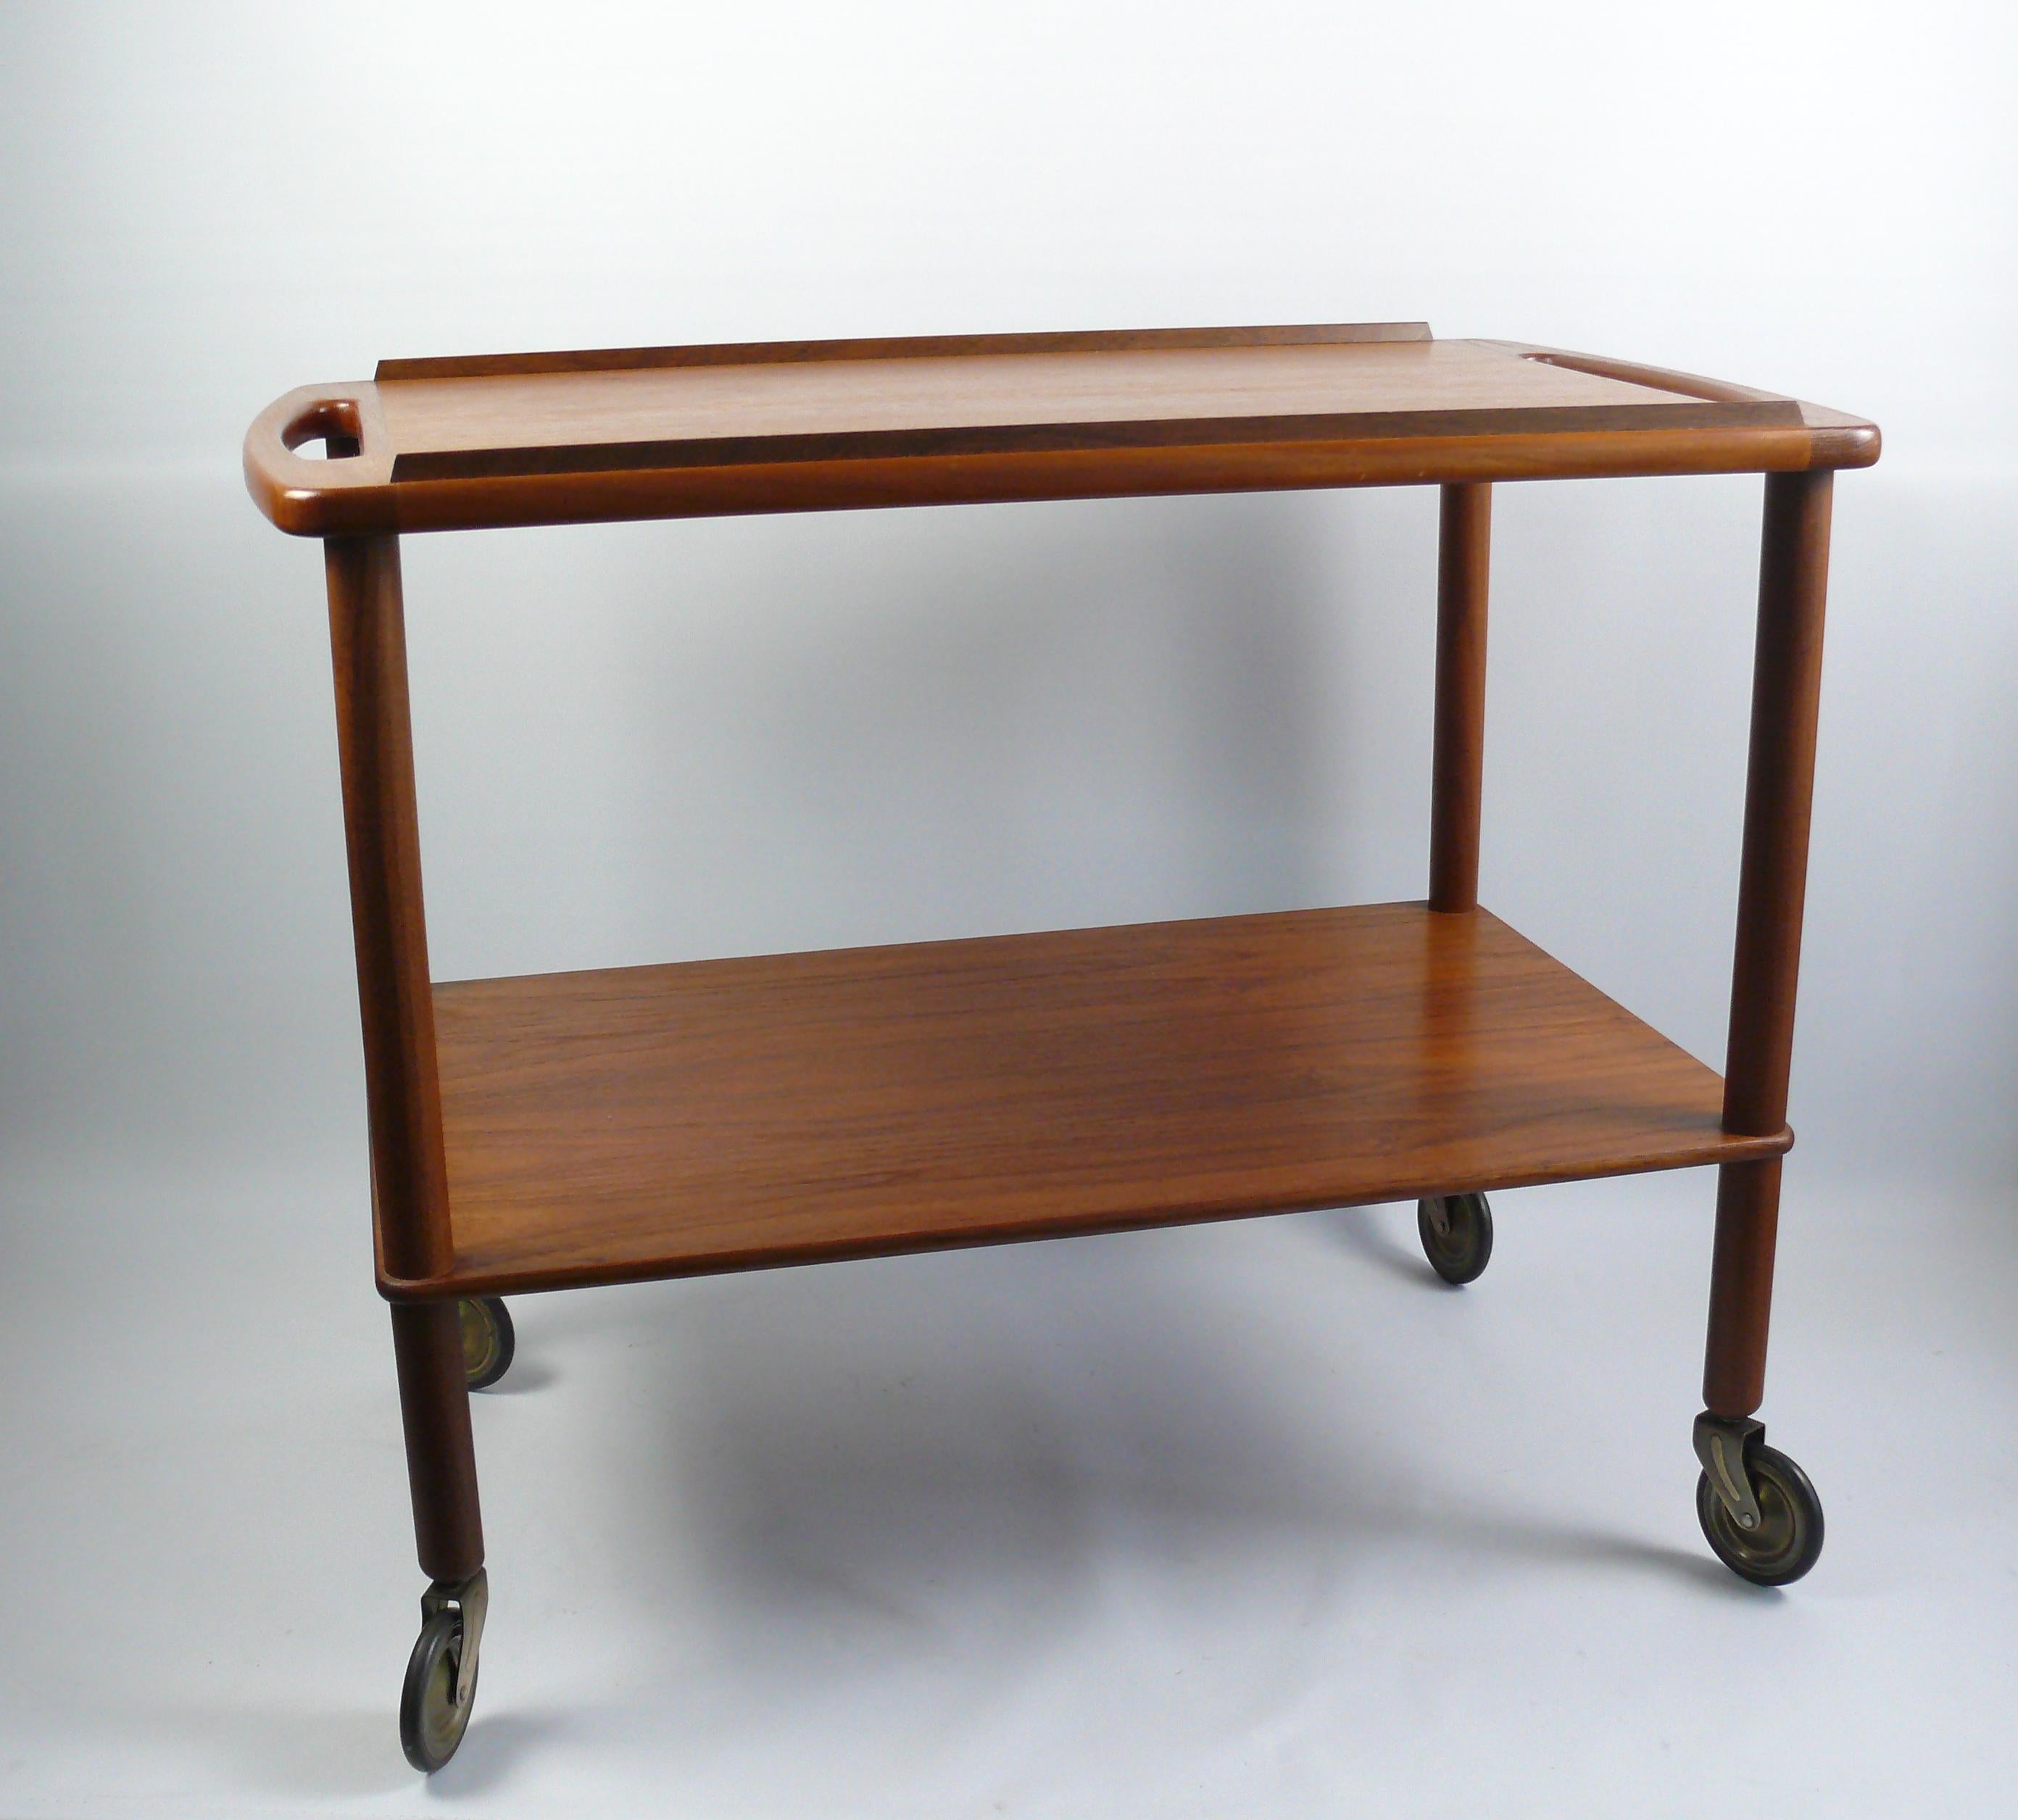 Very well preserved serving trolley / side table in teak from Denmark, probably from the Bowa company, originally from the 1960s. The design is very harmonious with beautiful wood, round legs and rounded tops. The upper plate also has two grip holes